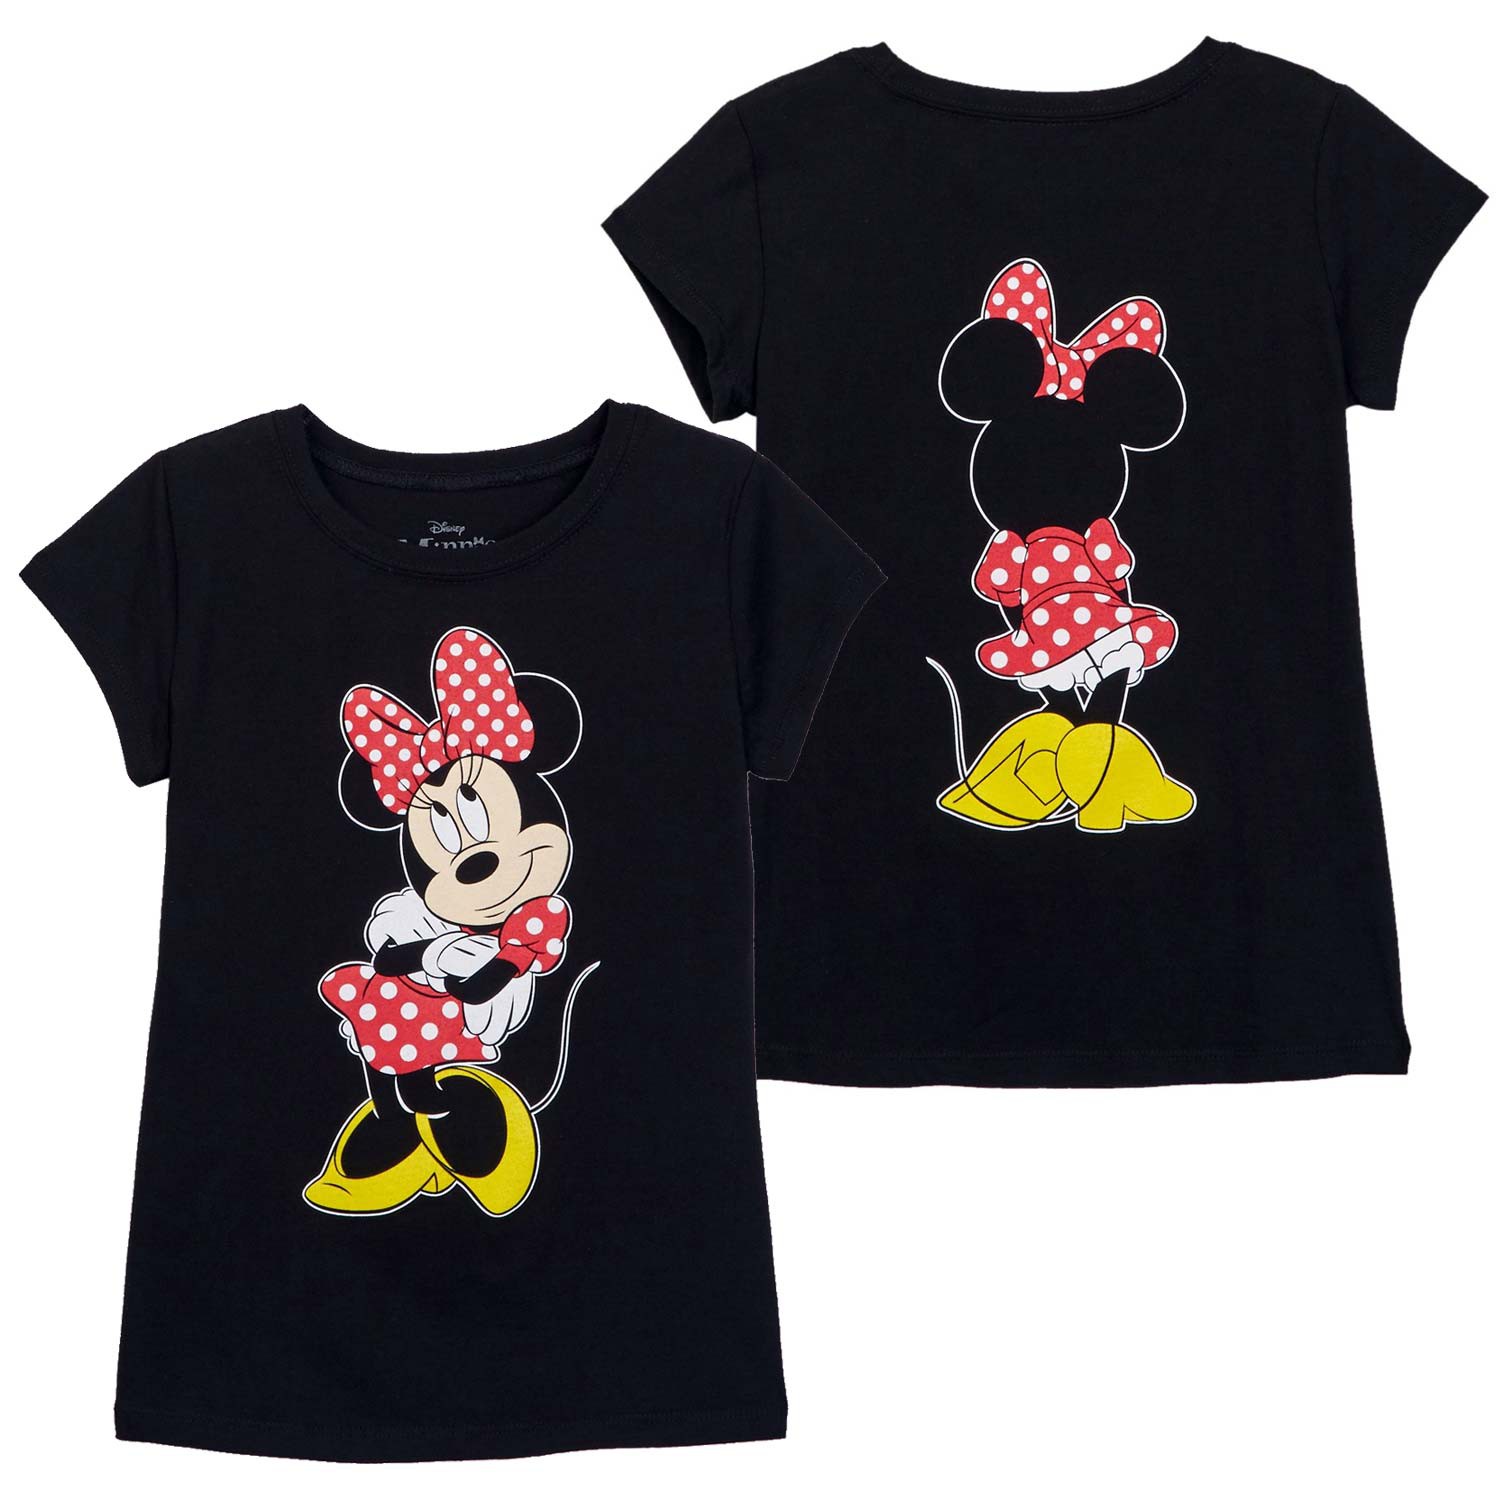 Minnie Mouse Front Back Print Girls Youth Black T-Shirt